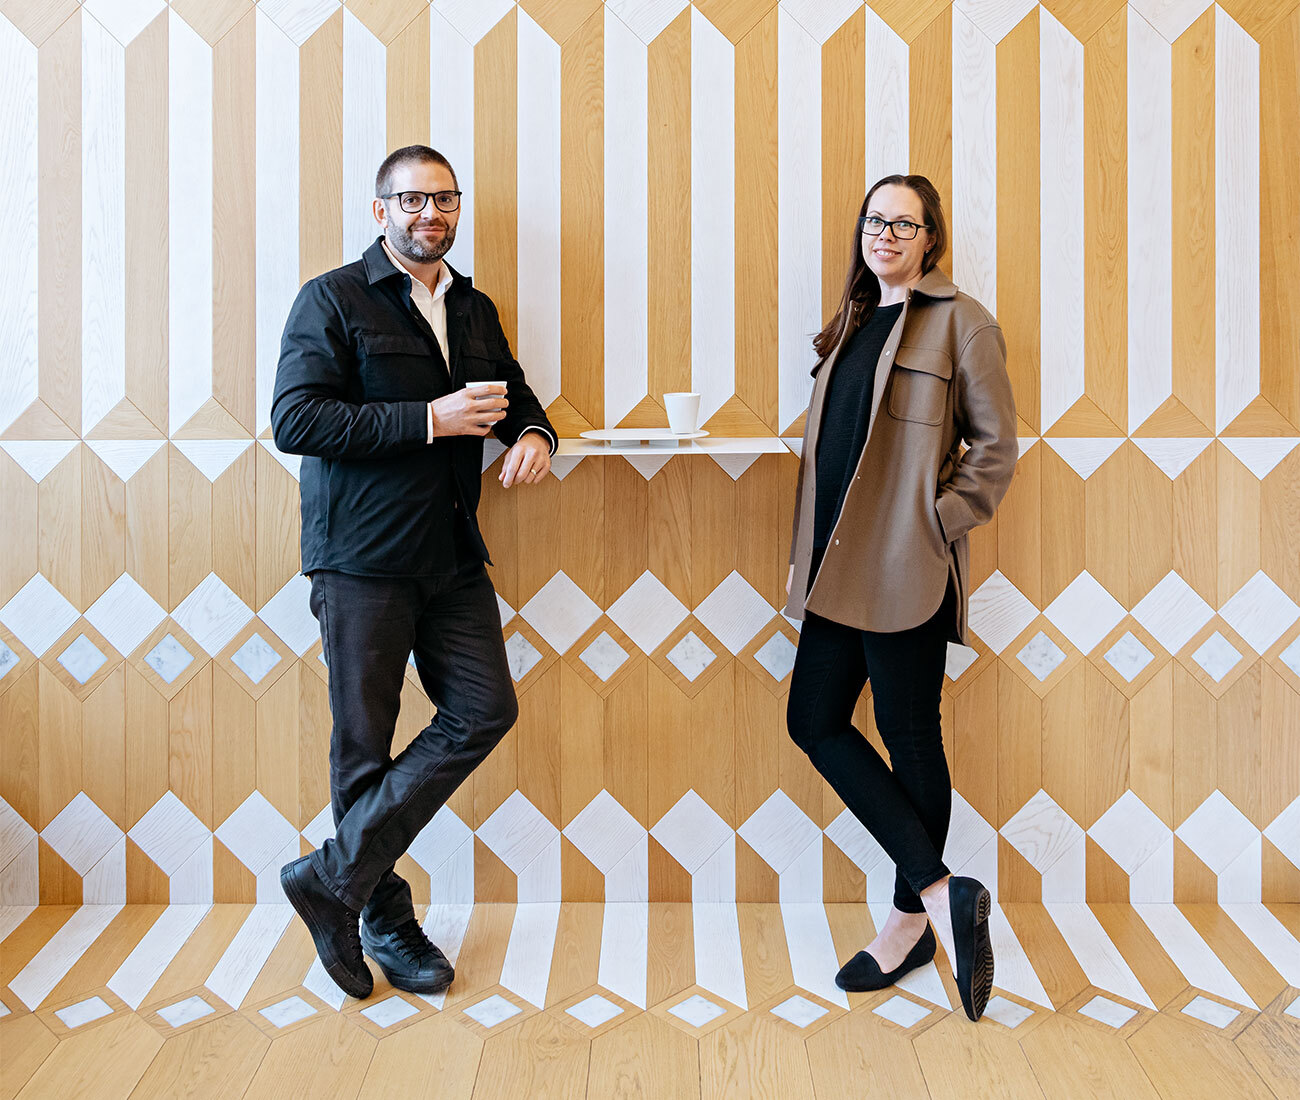 Andrew and Jodi Batay-Csorba, seen here in Milky's Coffee, which they designed. Photo by Arash Moallemi.